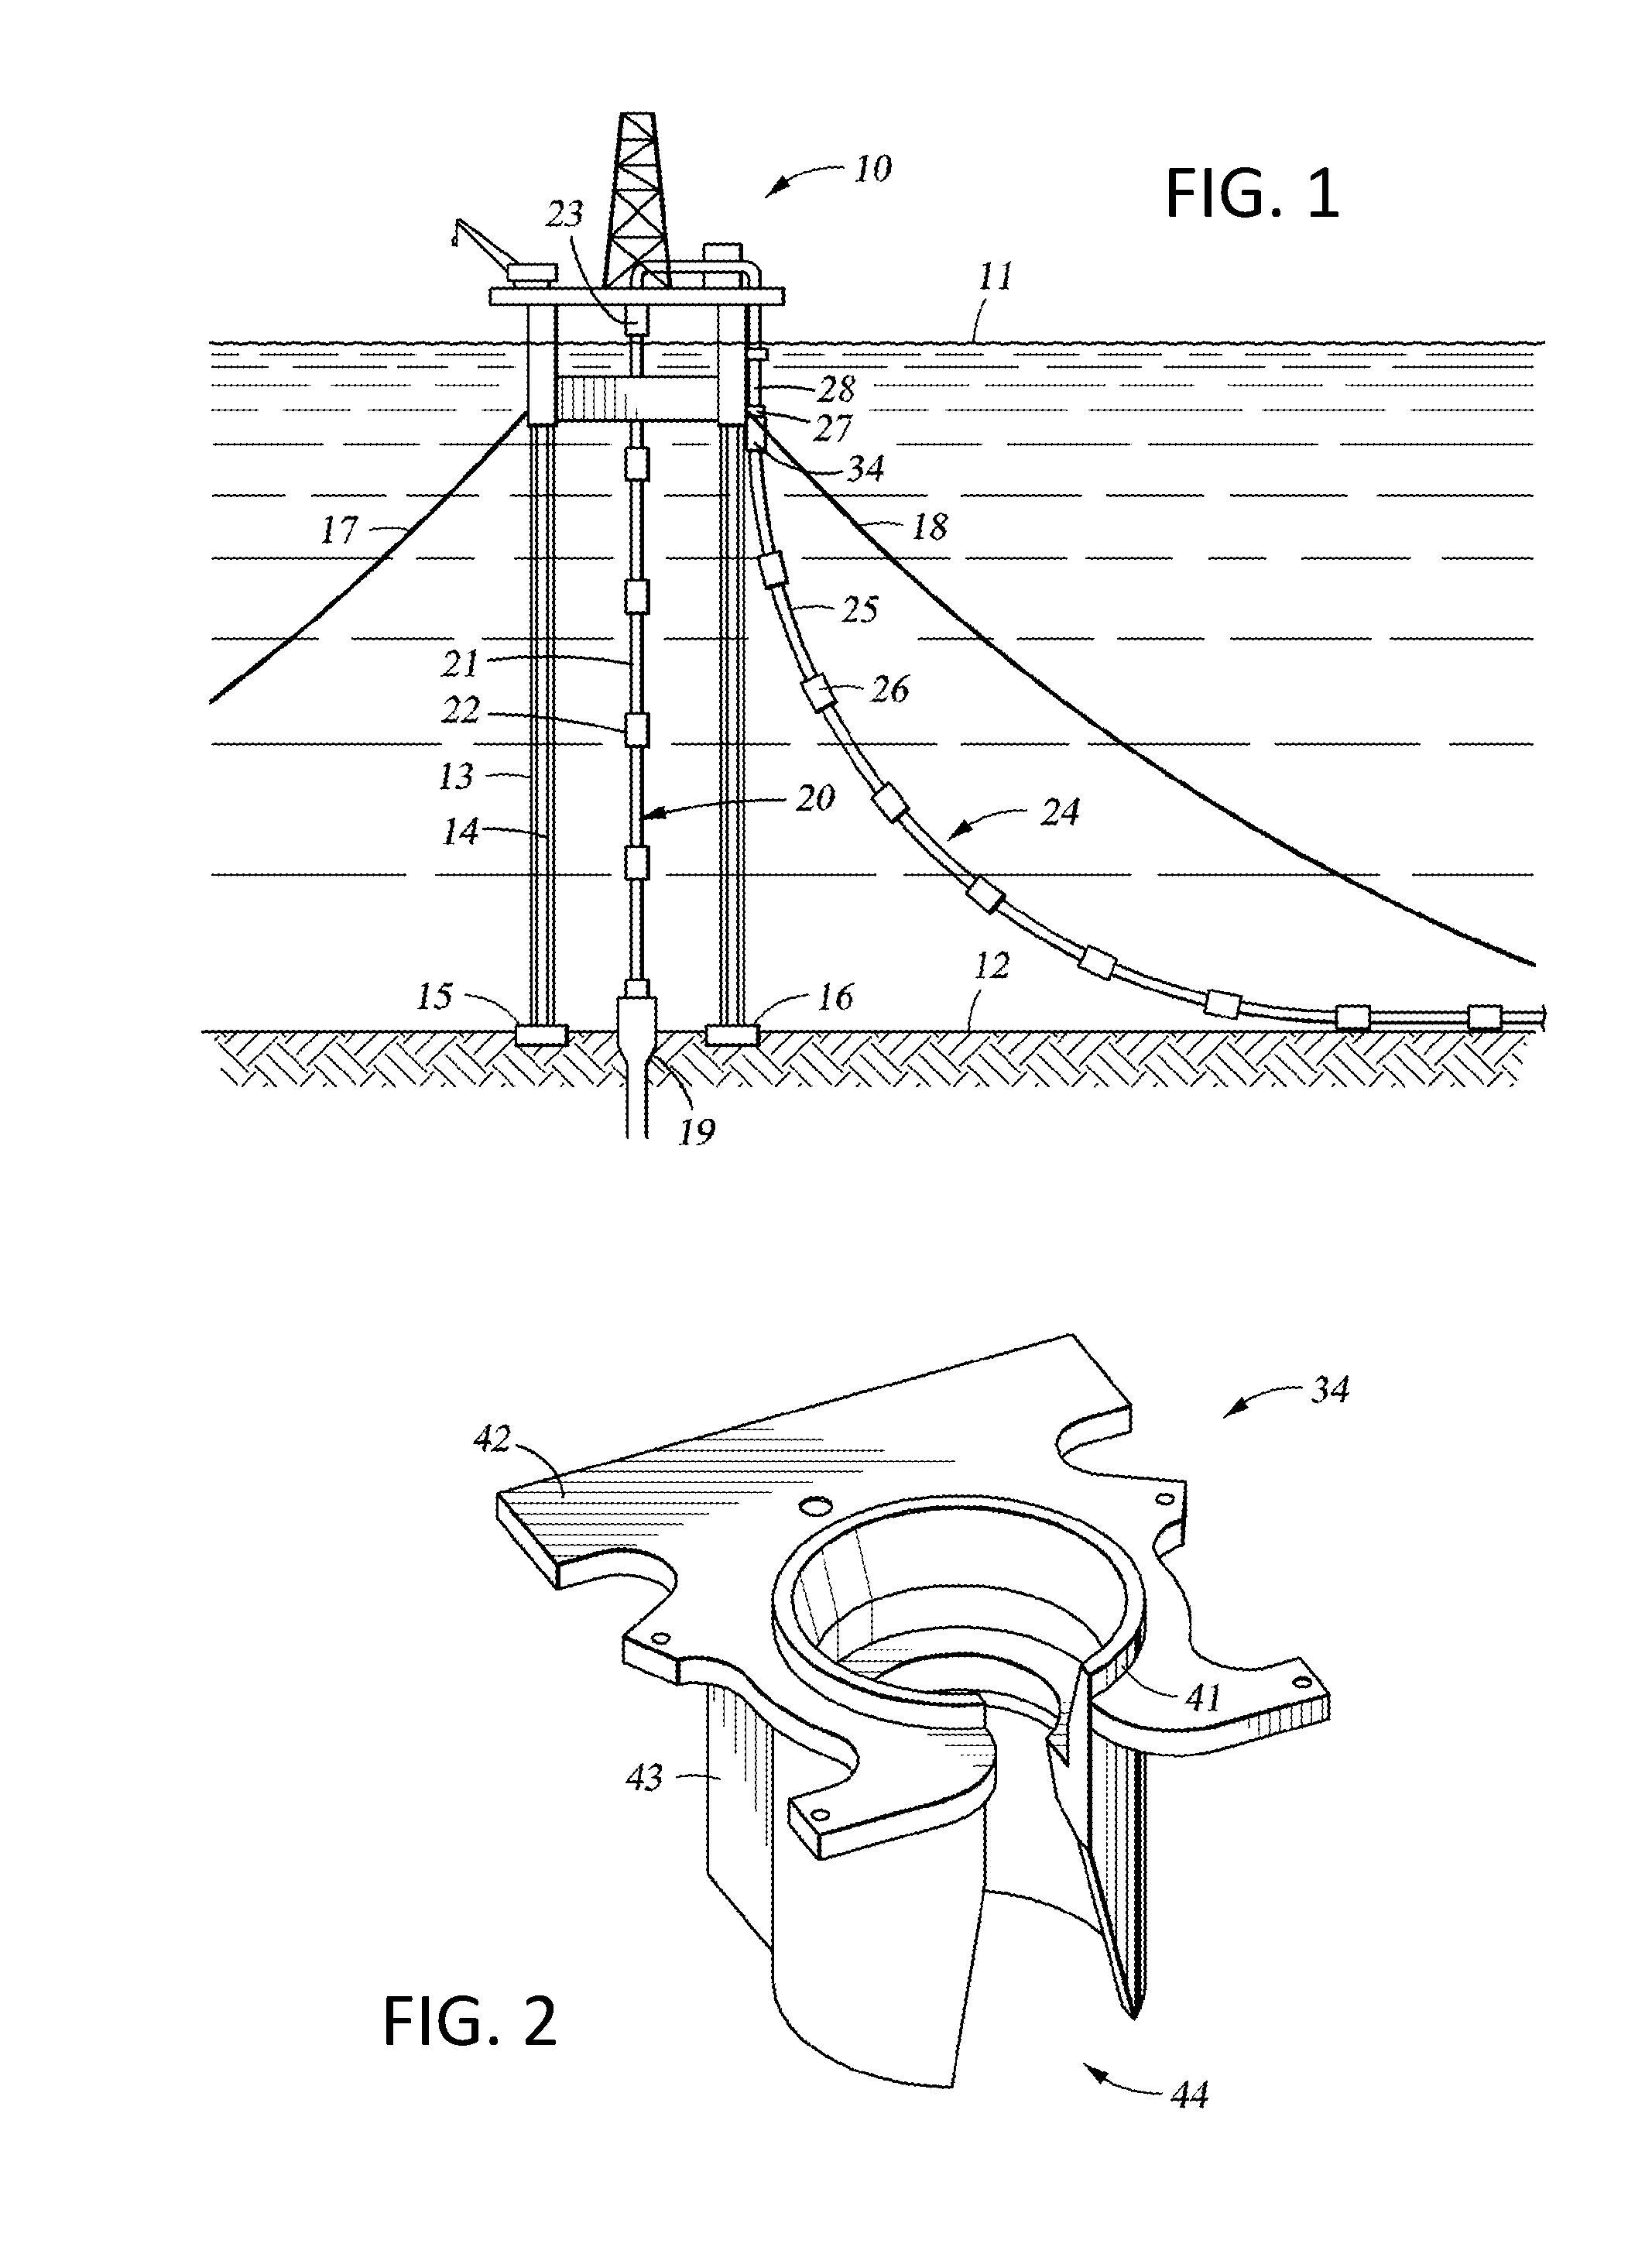 Flexible pipe joint having an annular flexible boot thermally or chemically insulating an annular elastomeric flexible element